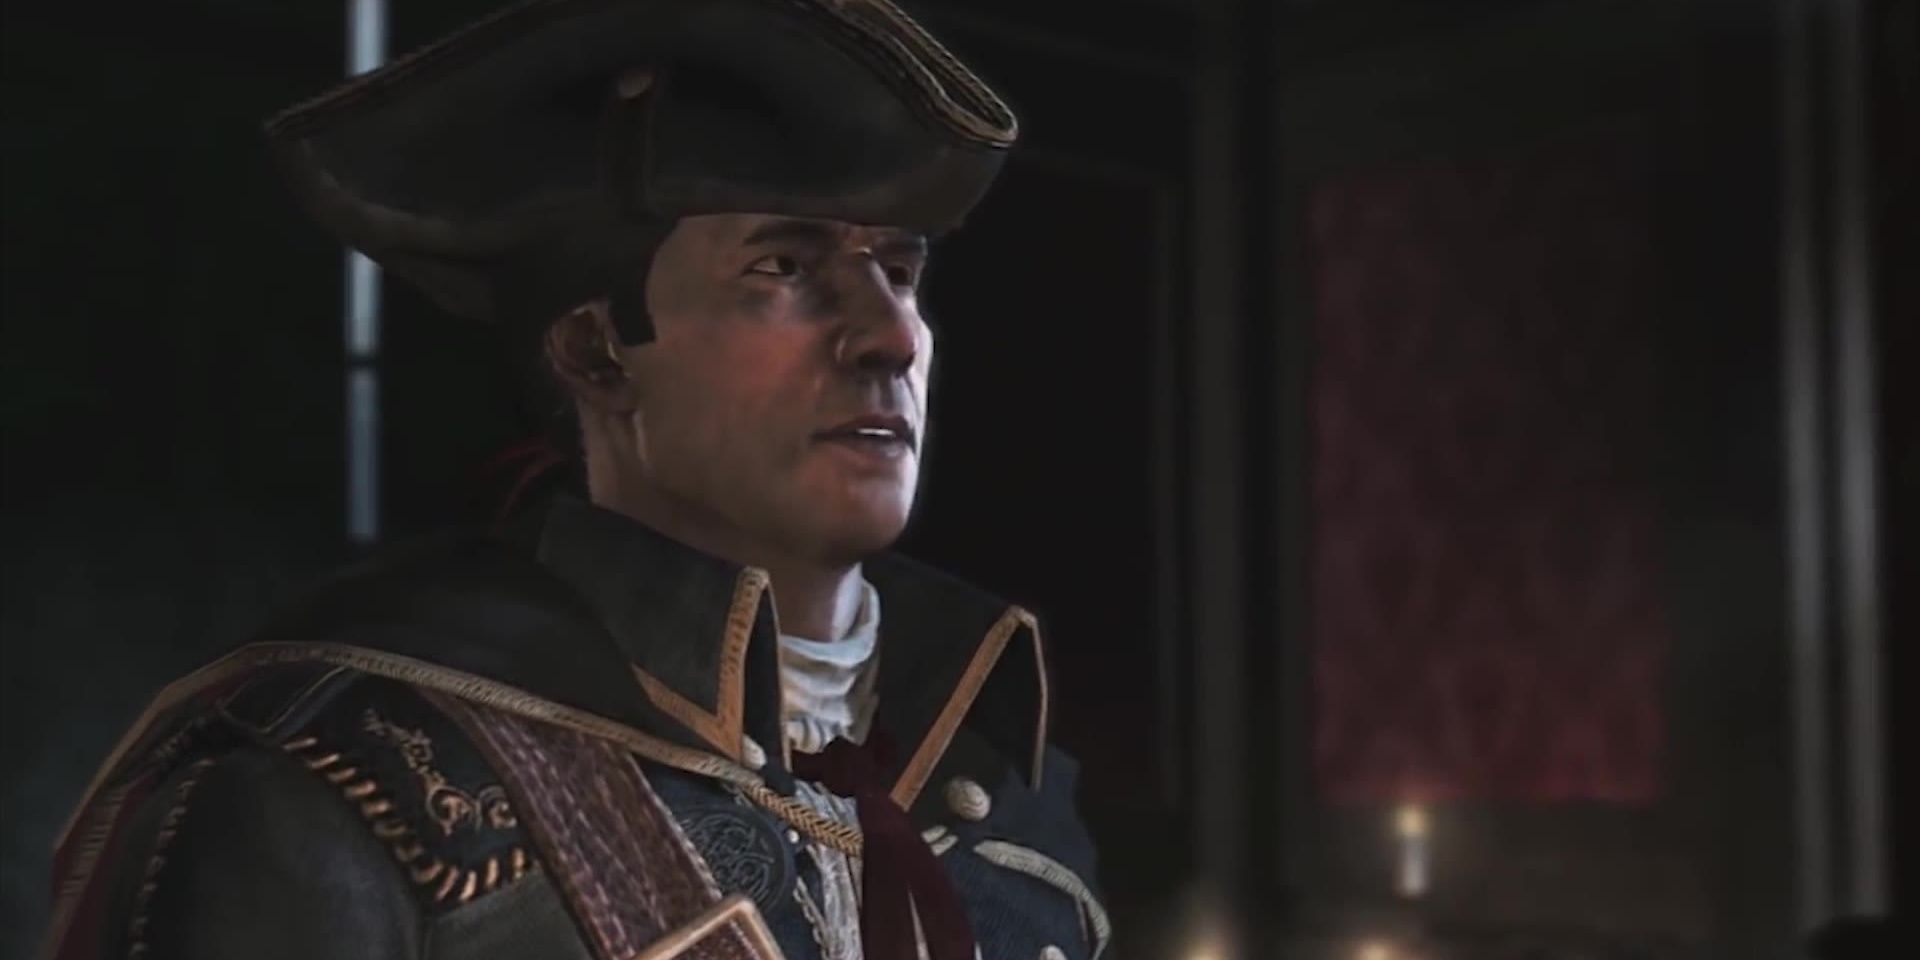 Haytham Kenway addresses his minions in Assassin's Creed III 